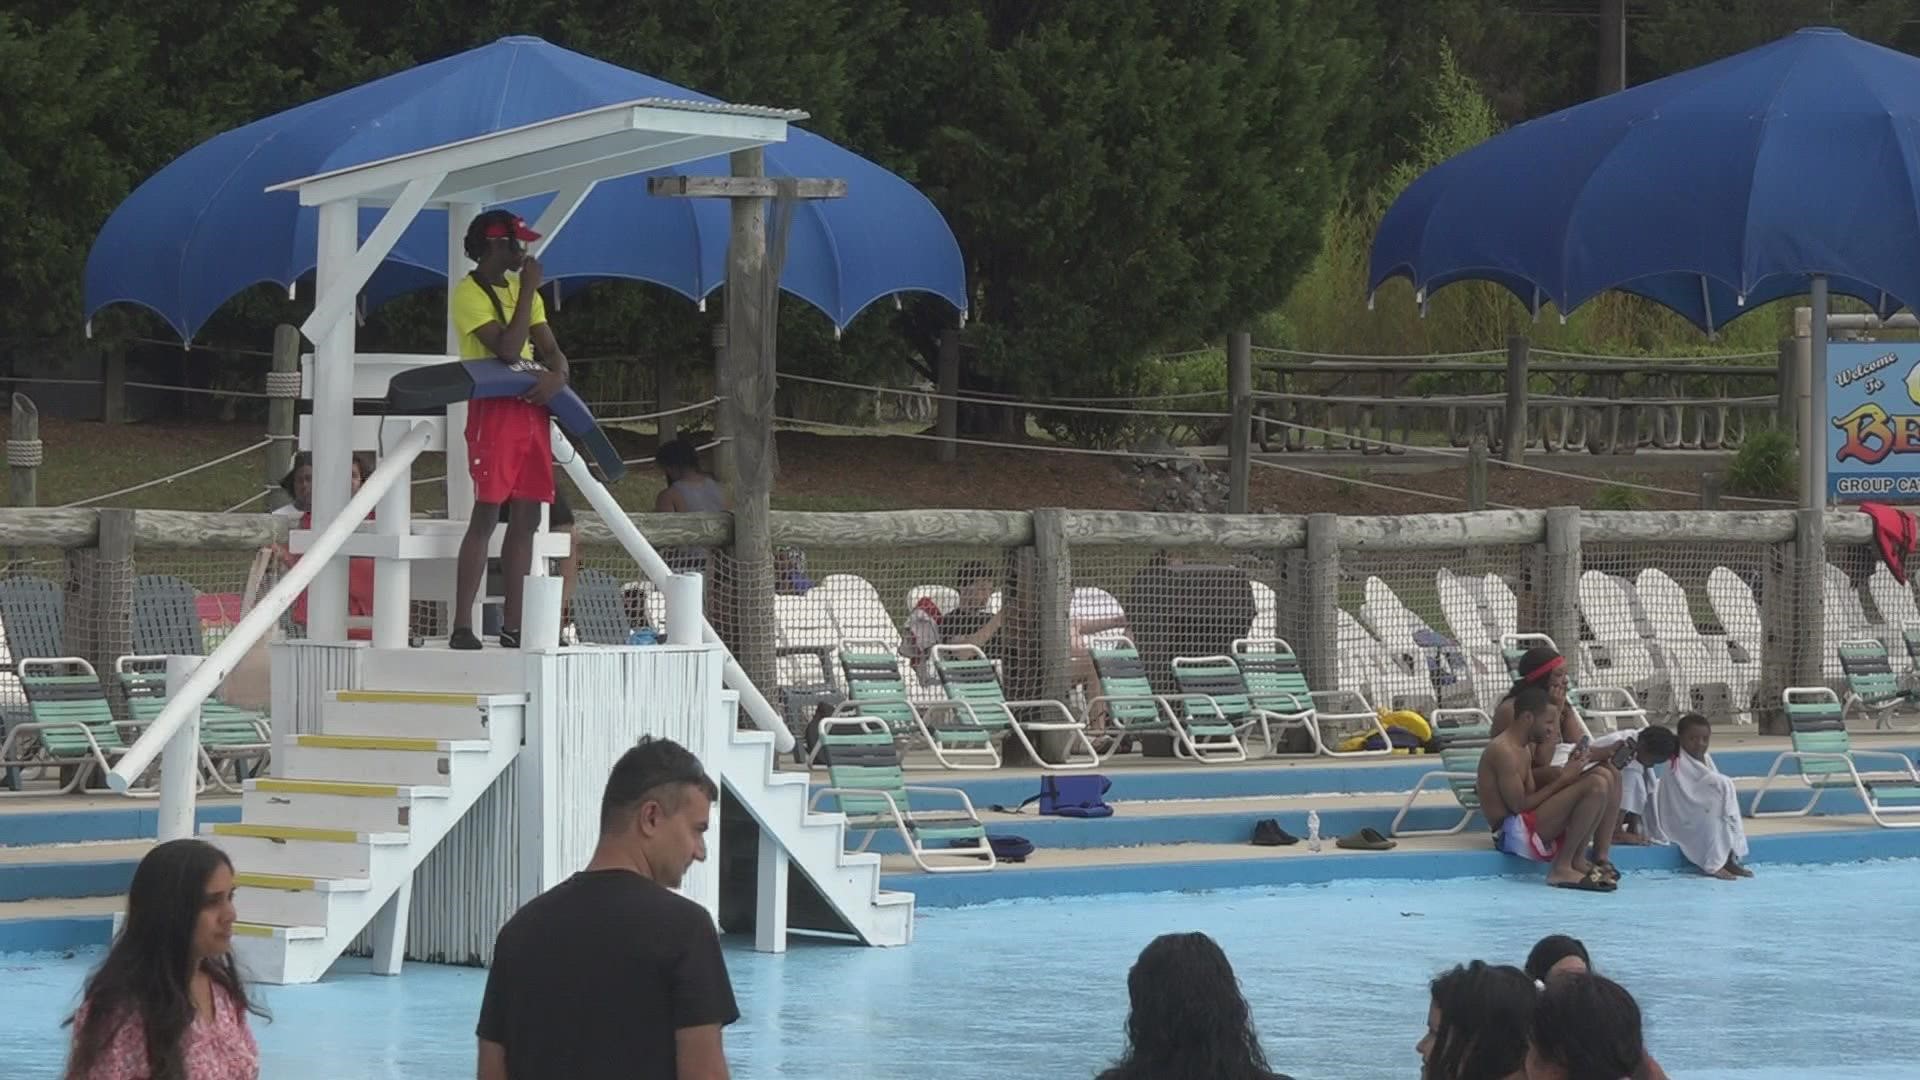 Guilford County said pools at three public parks will not open on Memorial Day weekend due to a lack of lifeguards.